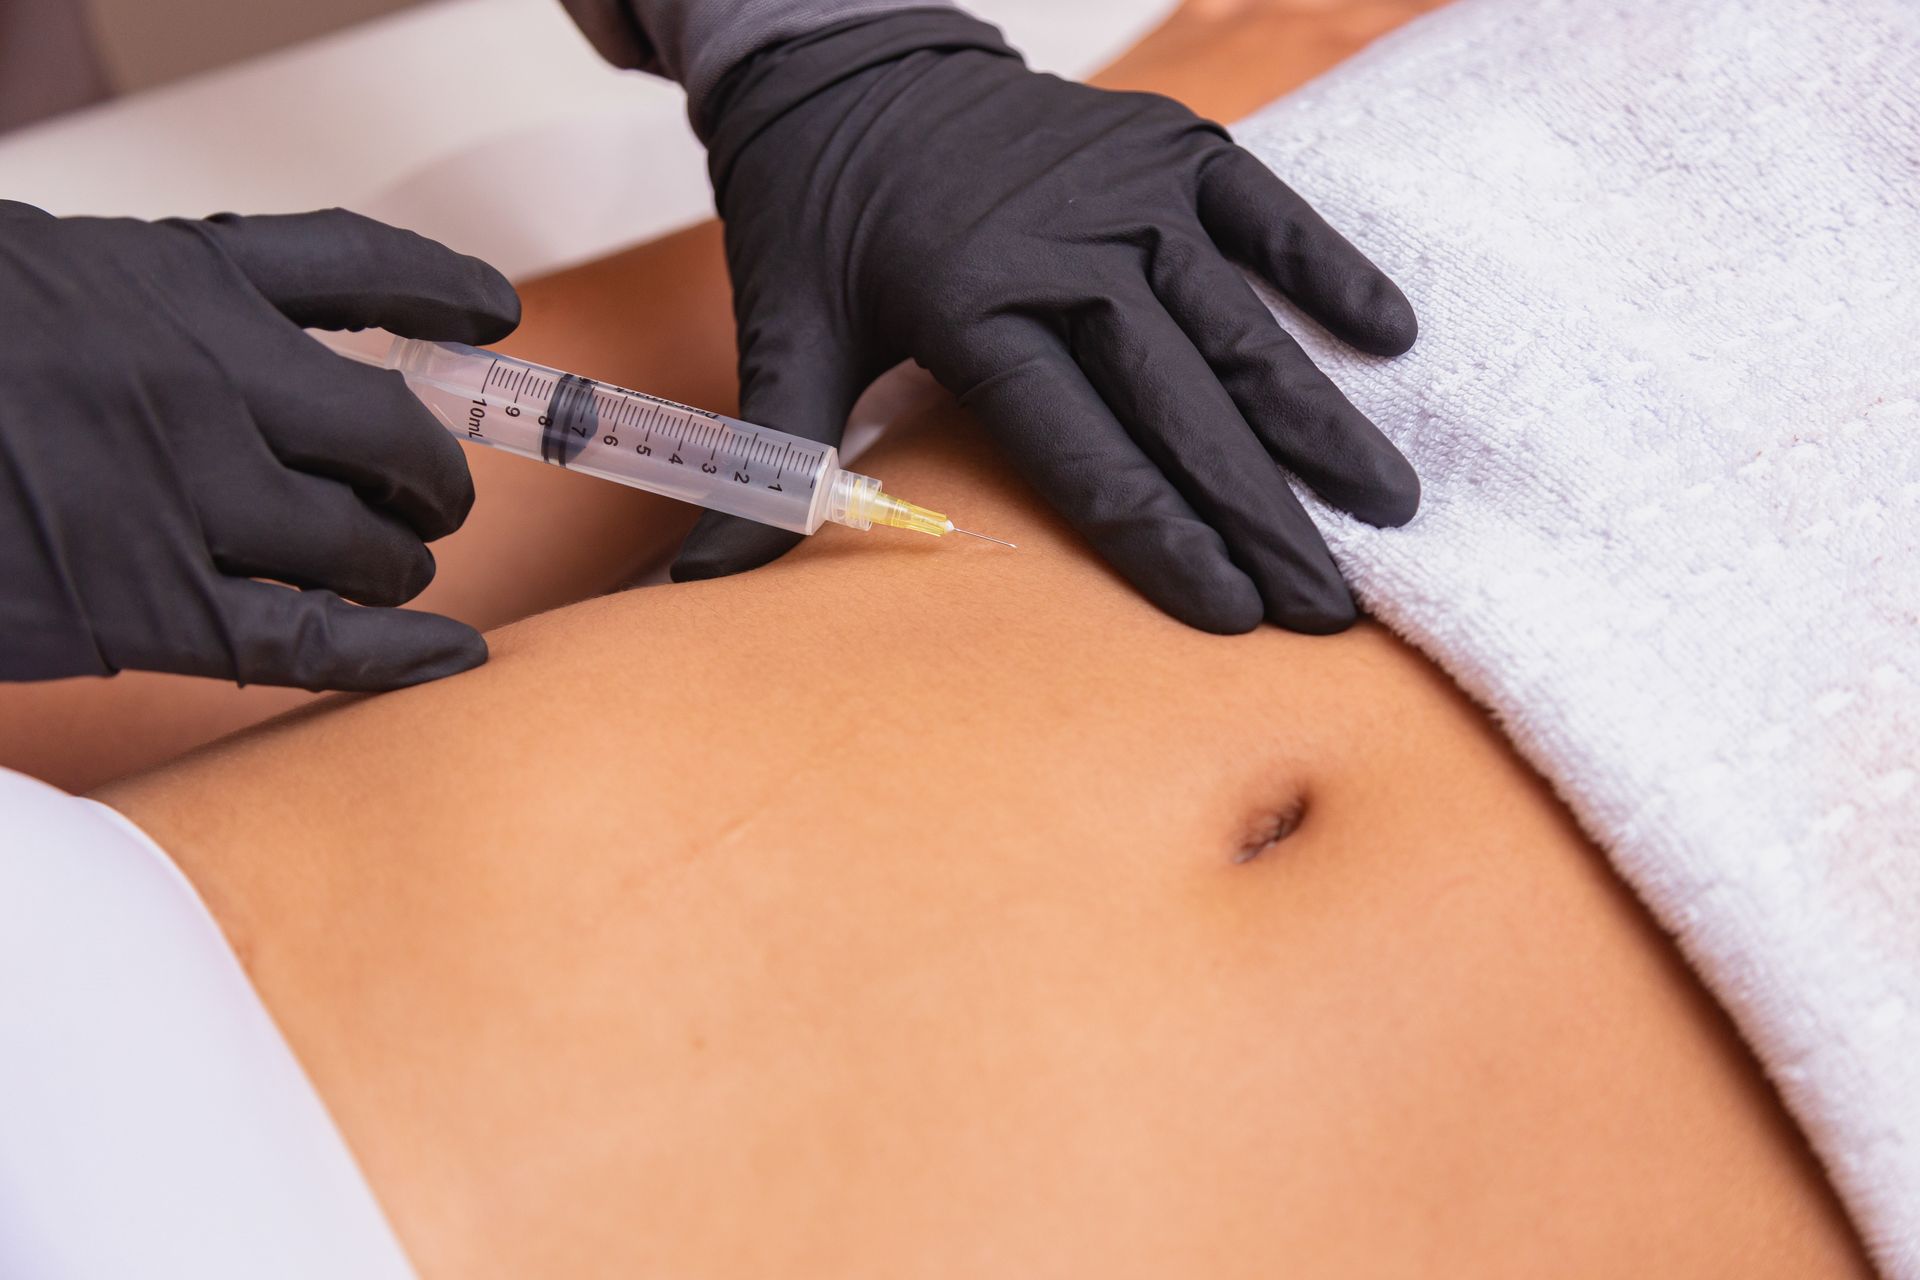 lipolysis injection into patient's stomach